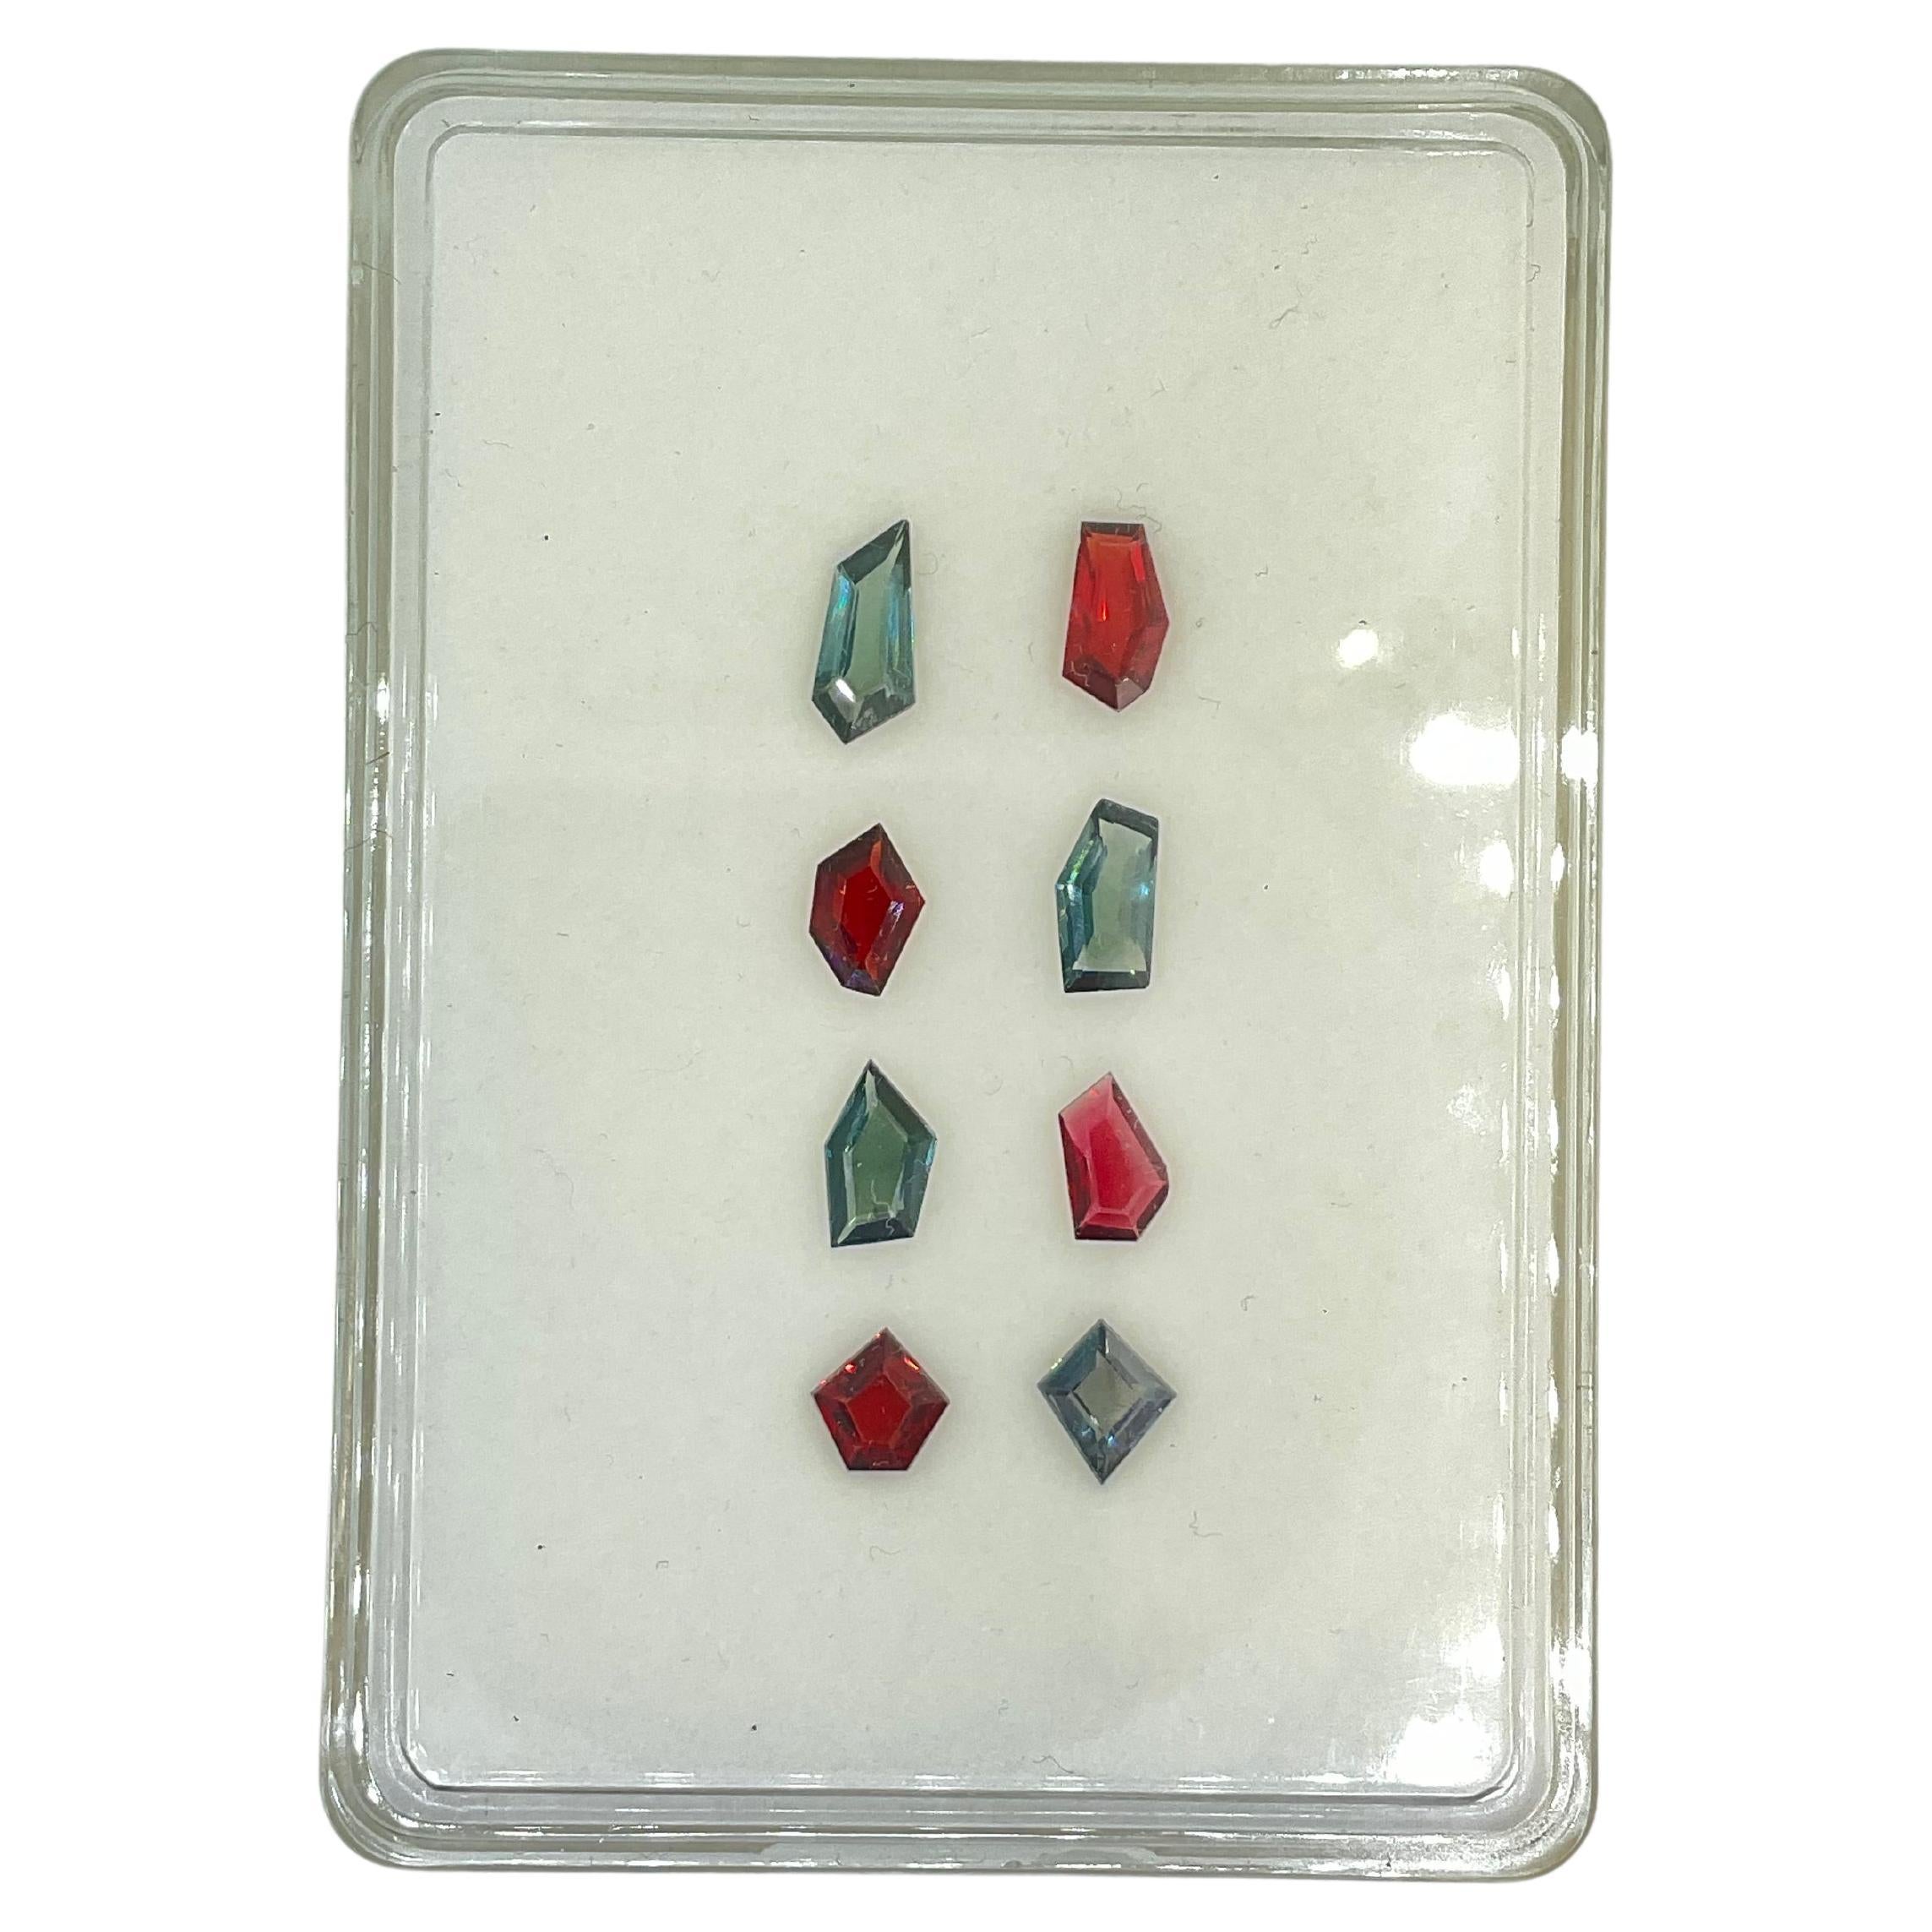 6.50 Carats Grey & Red Spinel Fancy Cut Stone Natural Gem For fine earrings For Sale